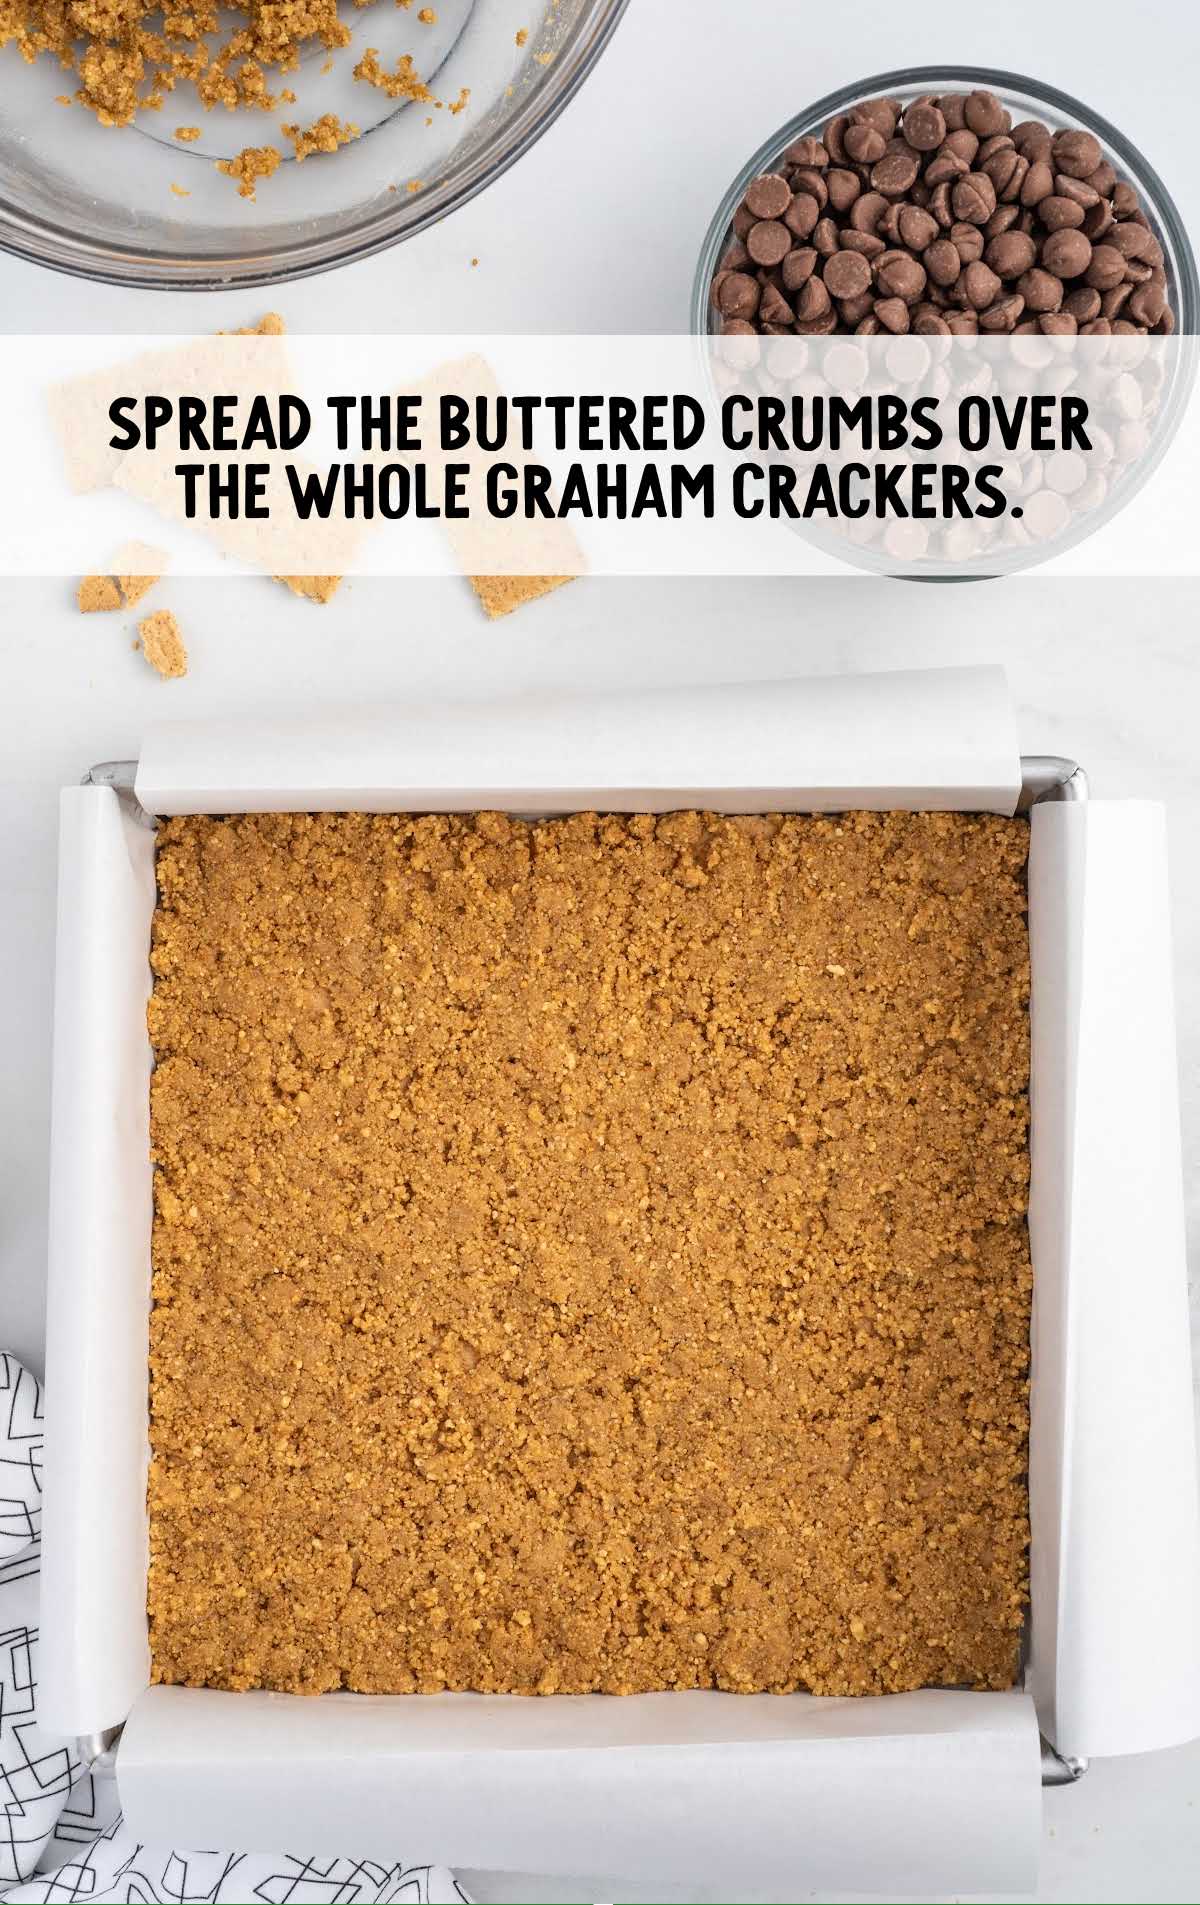 buttered crumbs spread over the whole graham crackers